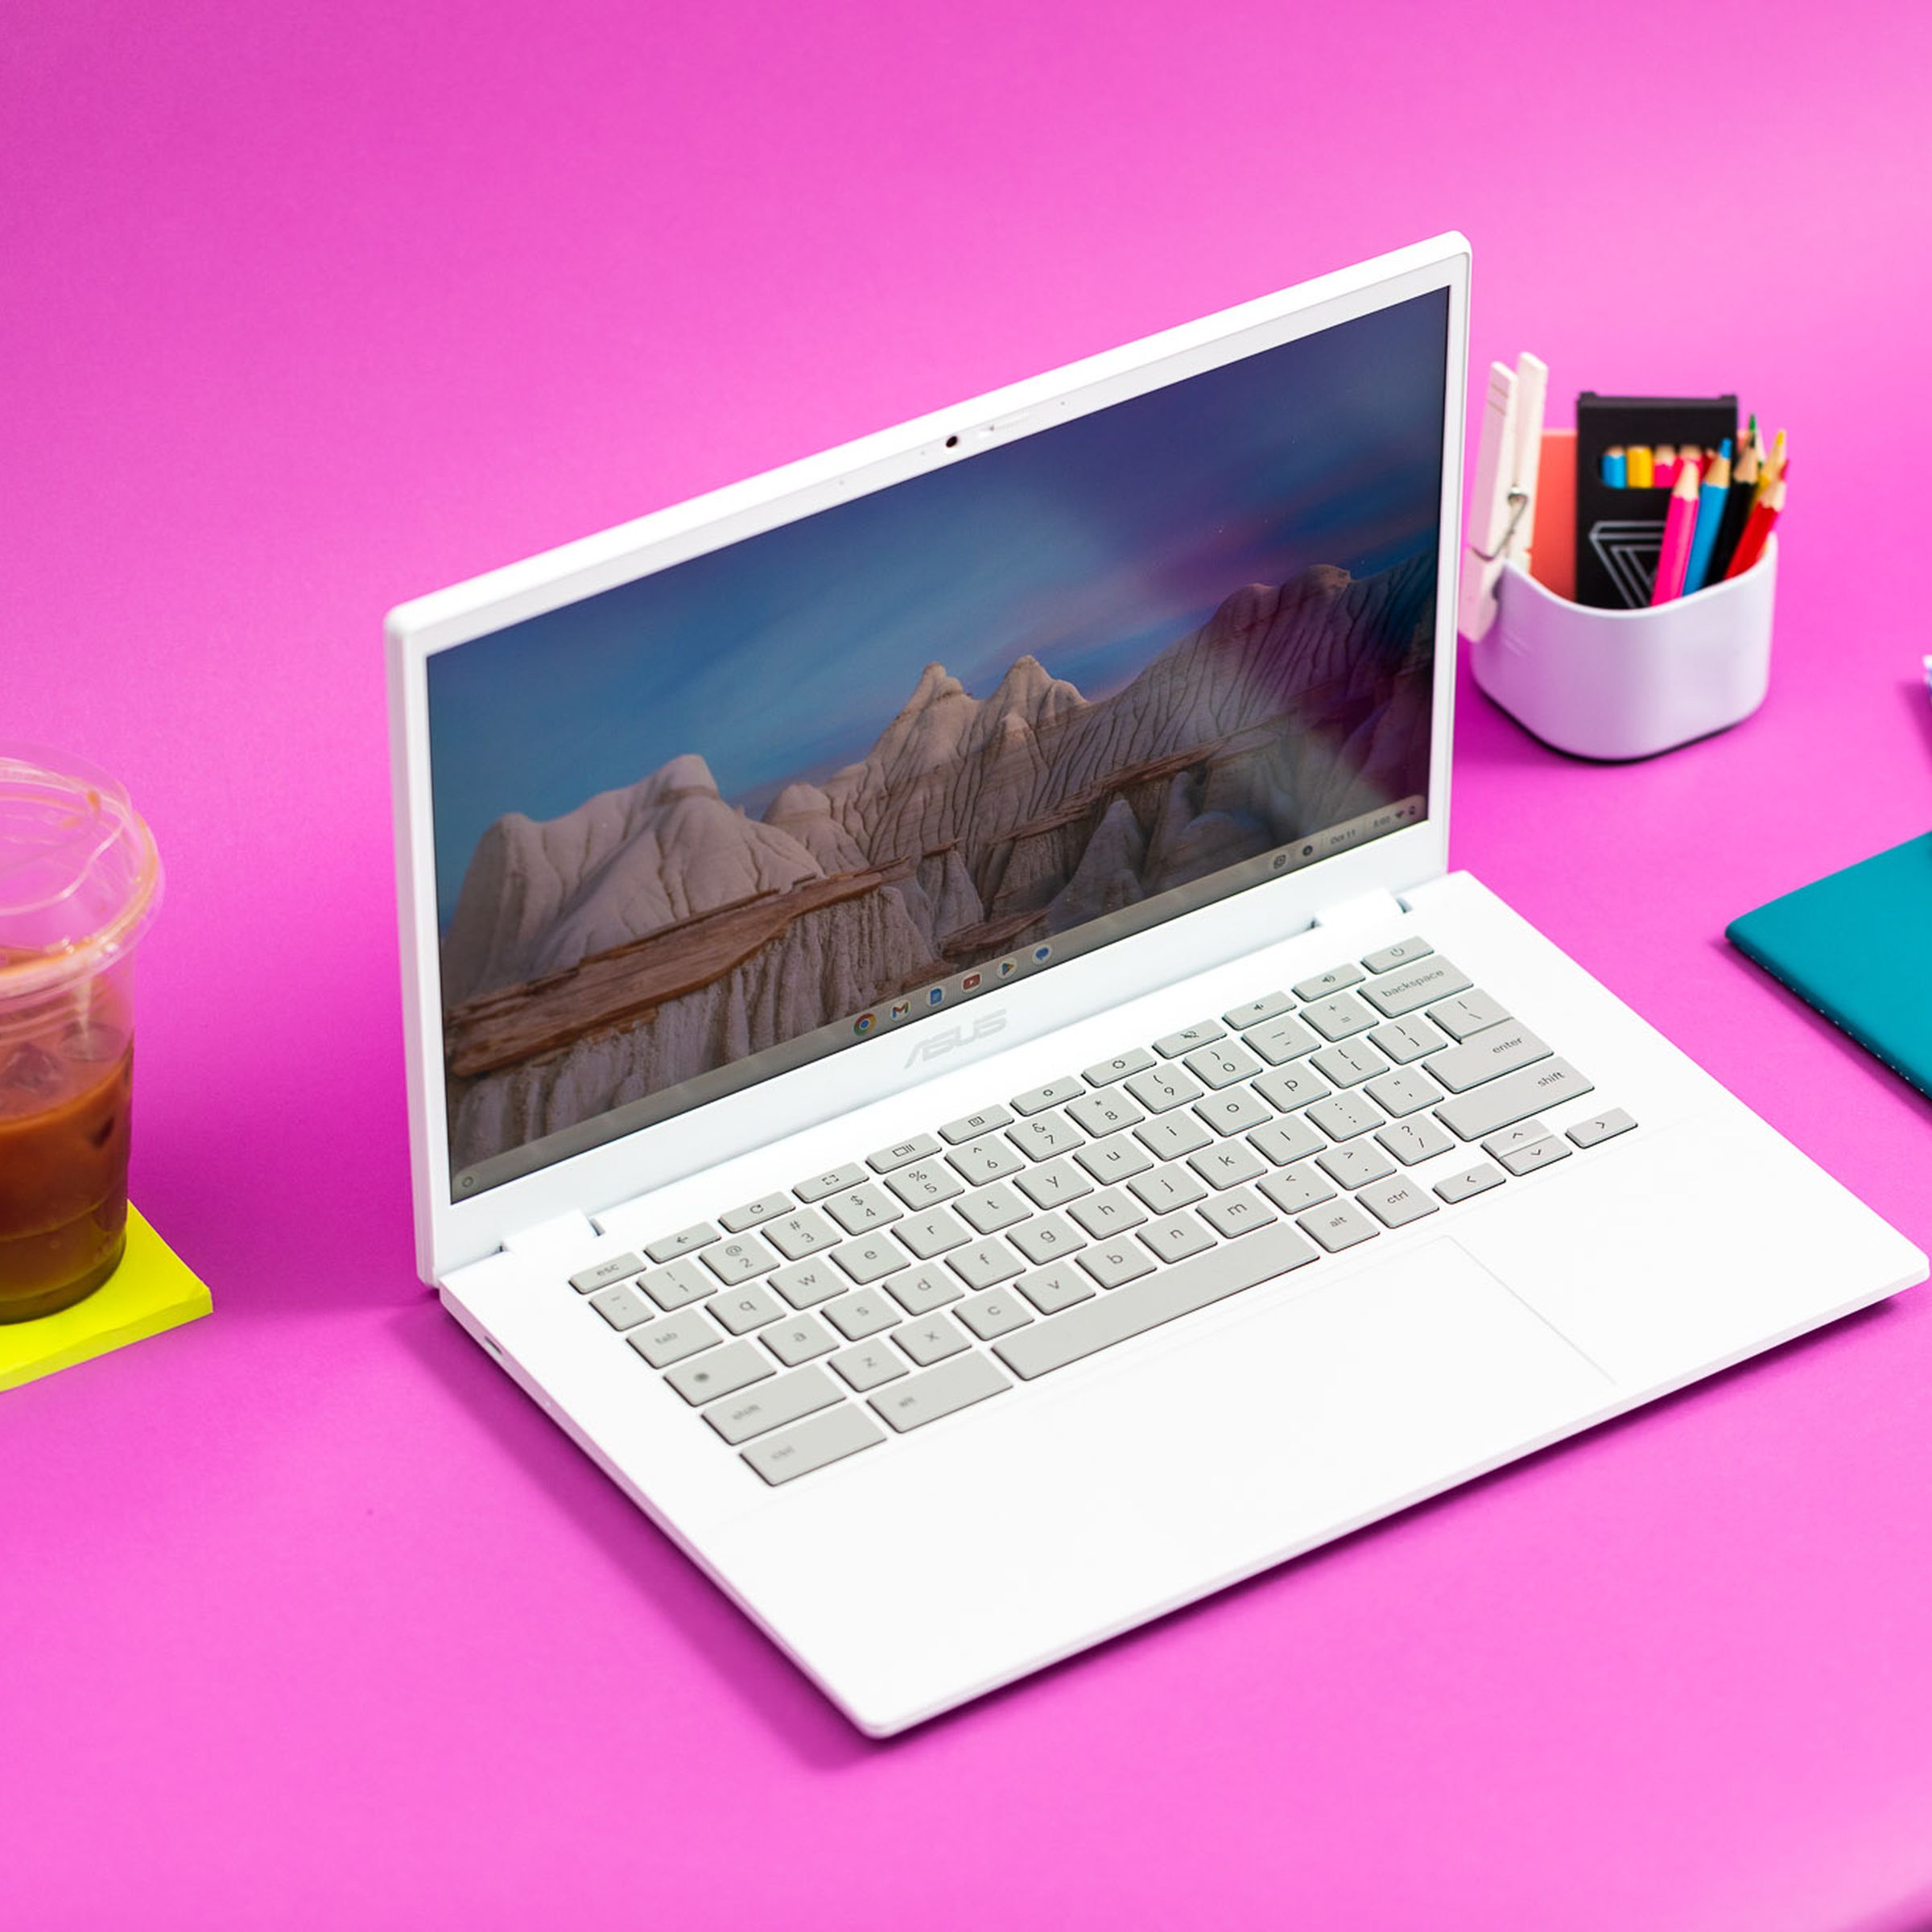 The Asus Chromebook Plus CX34 on a pink table with a coffee and post-it pad beside it.